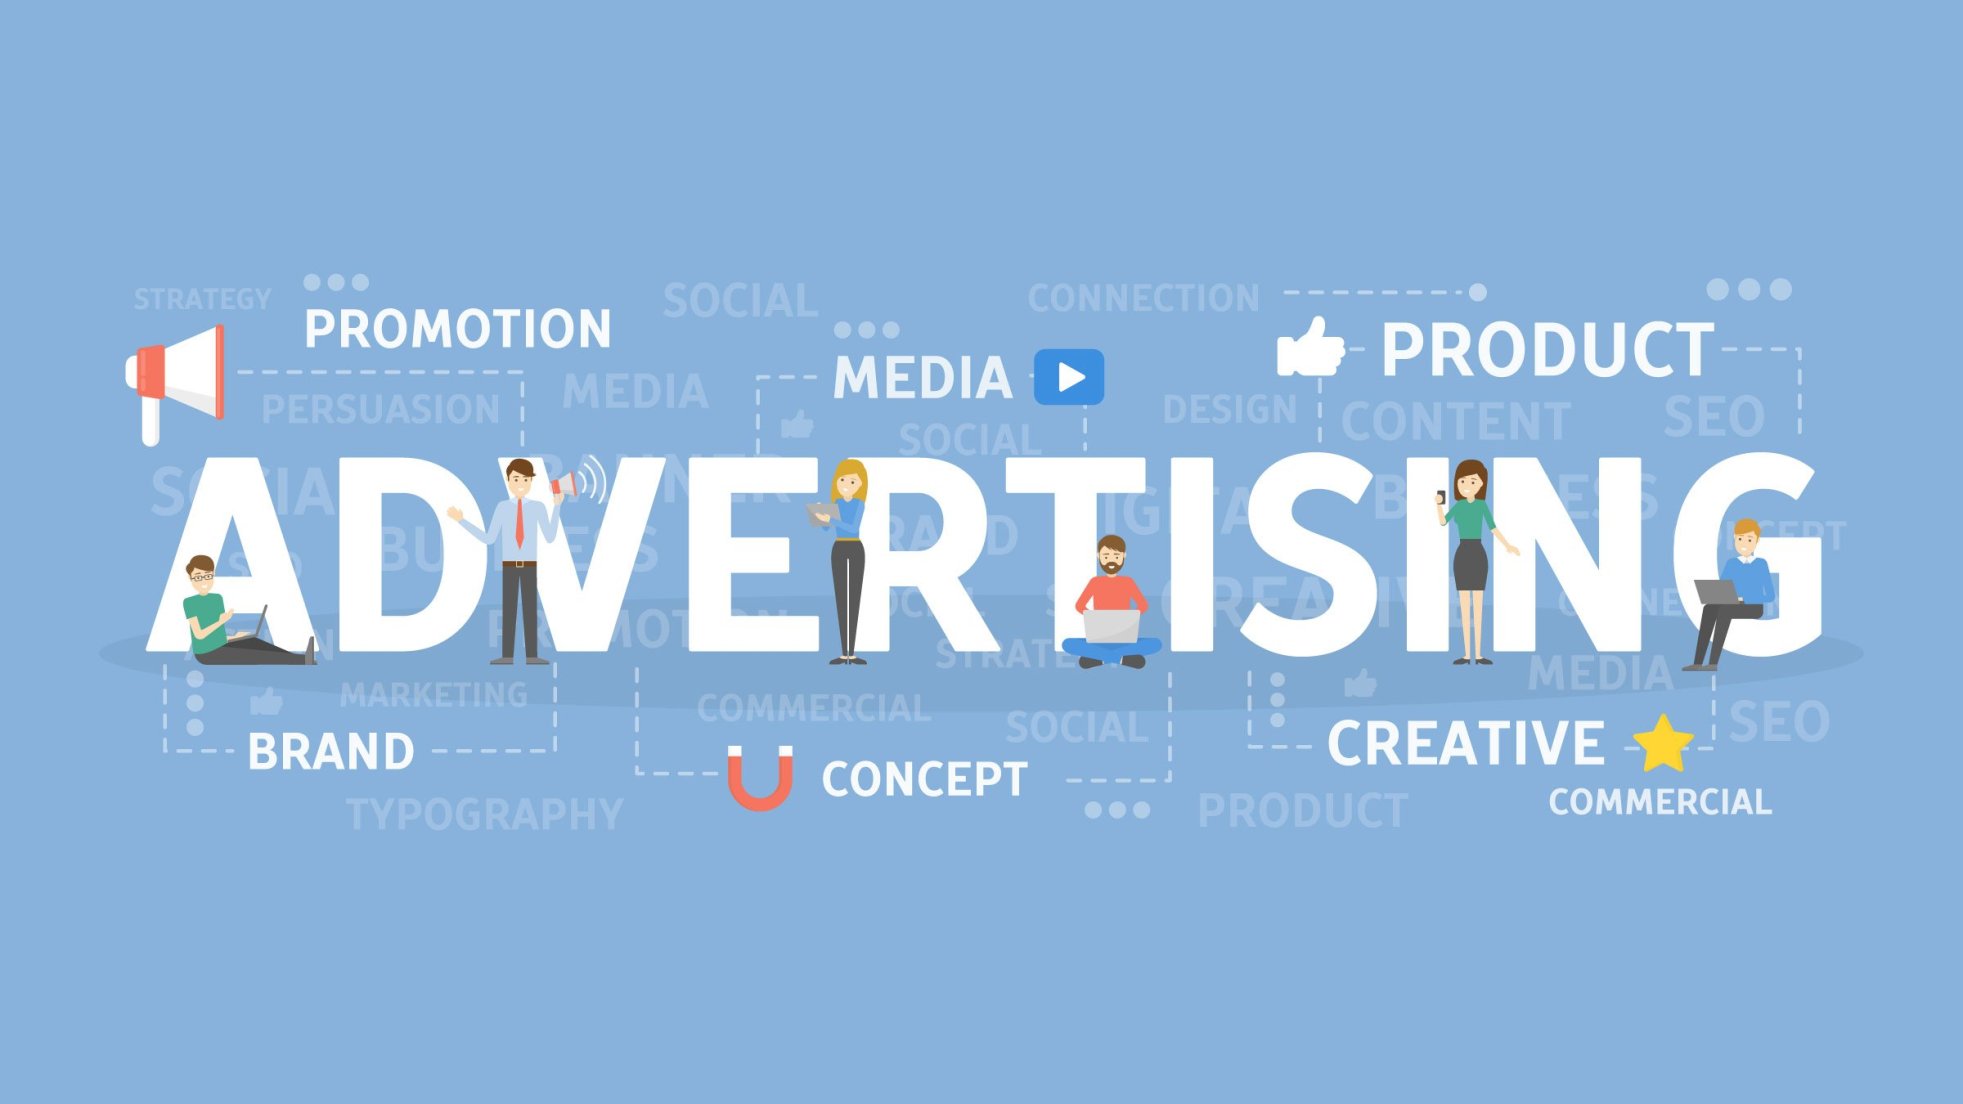 About Full Advertising Agency